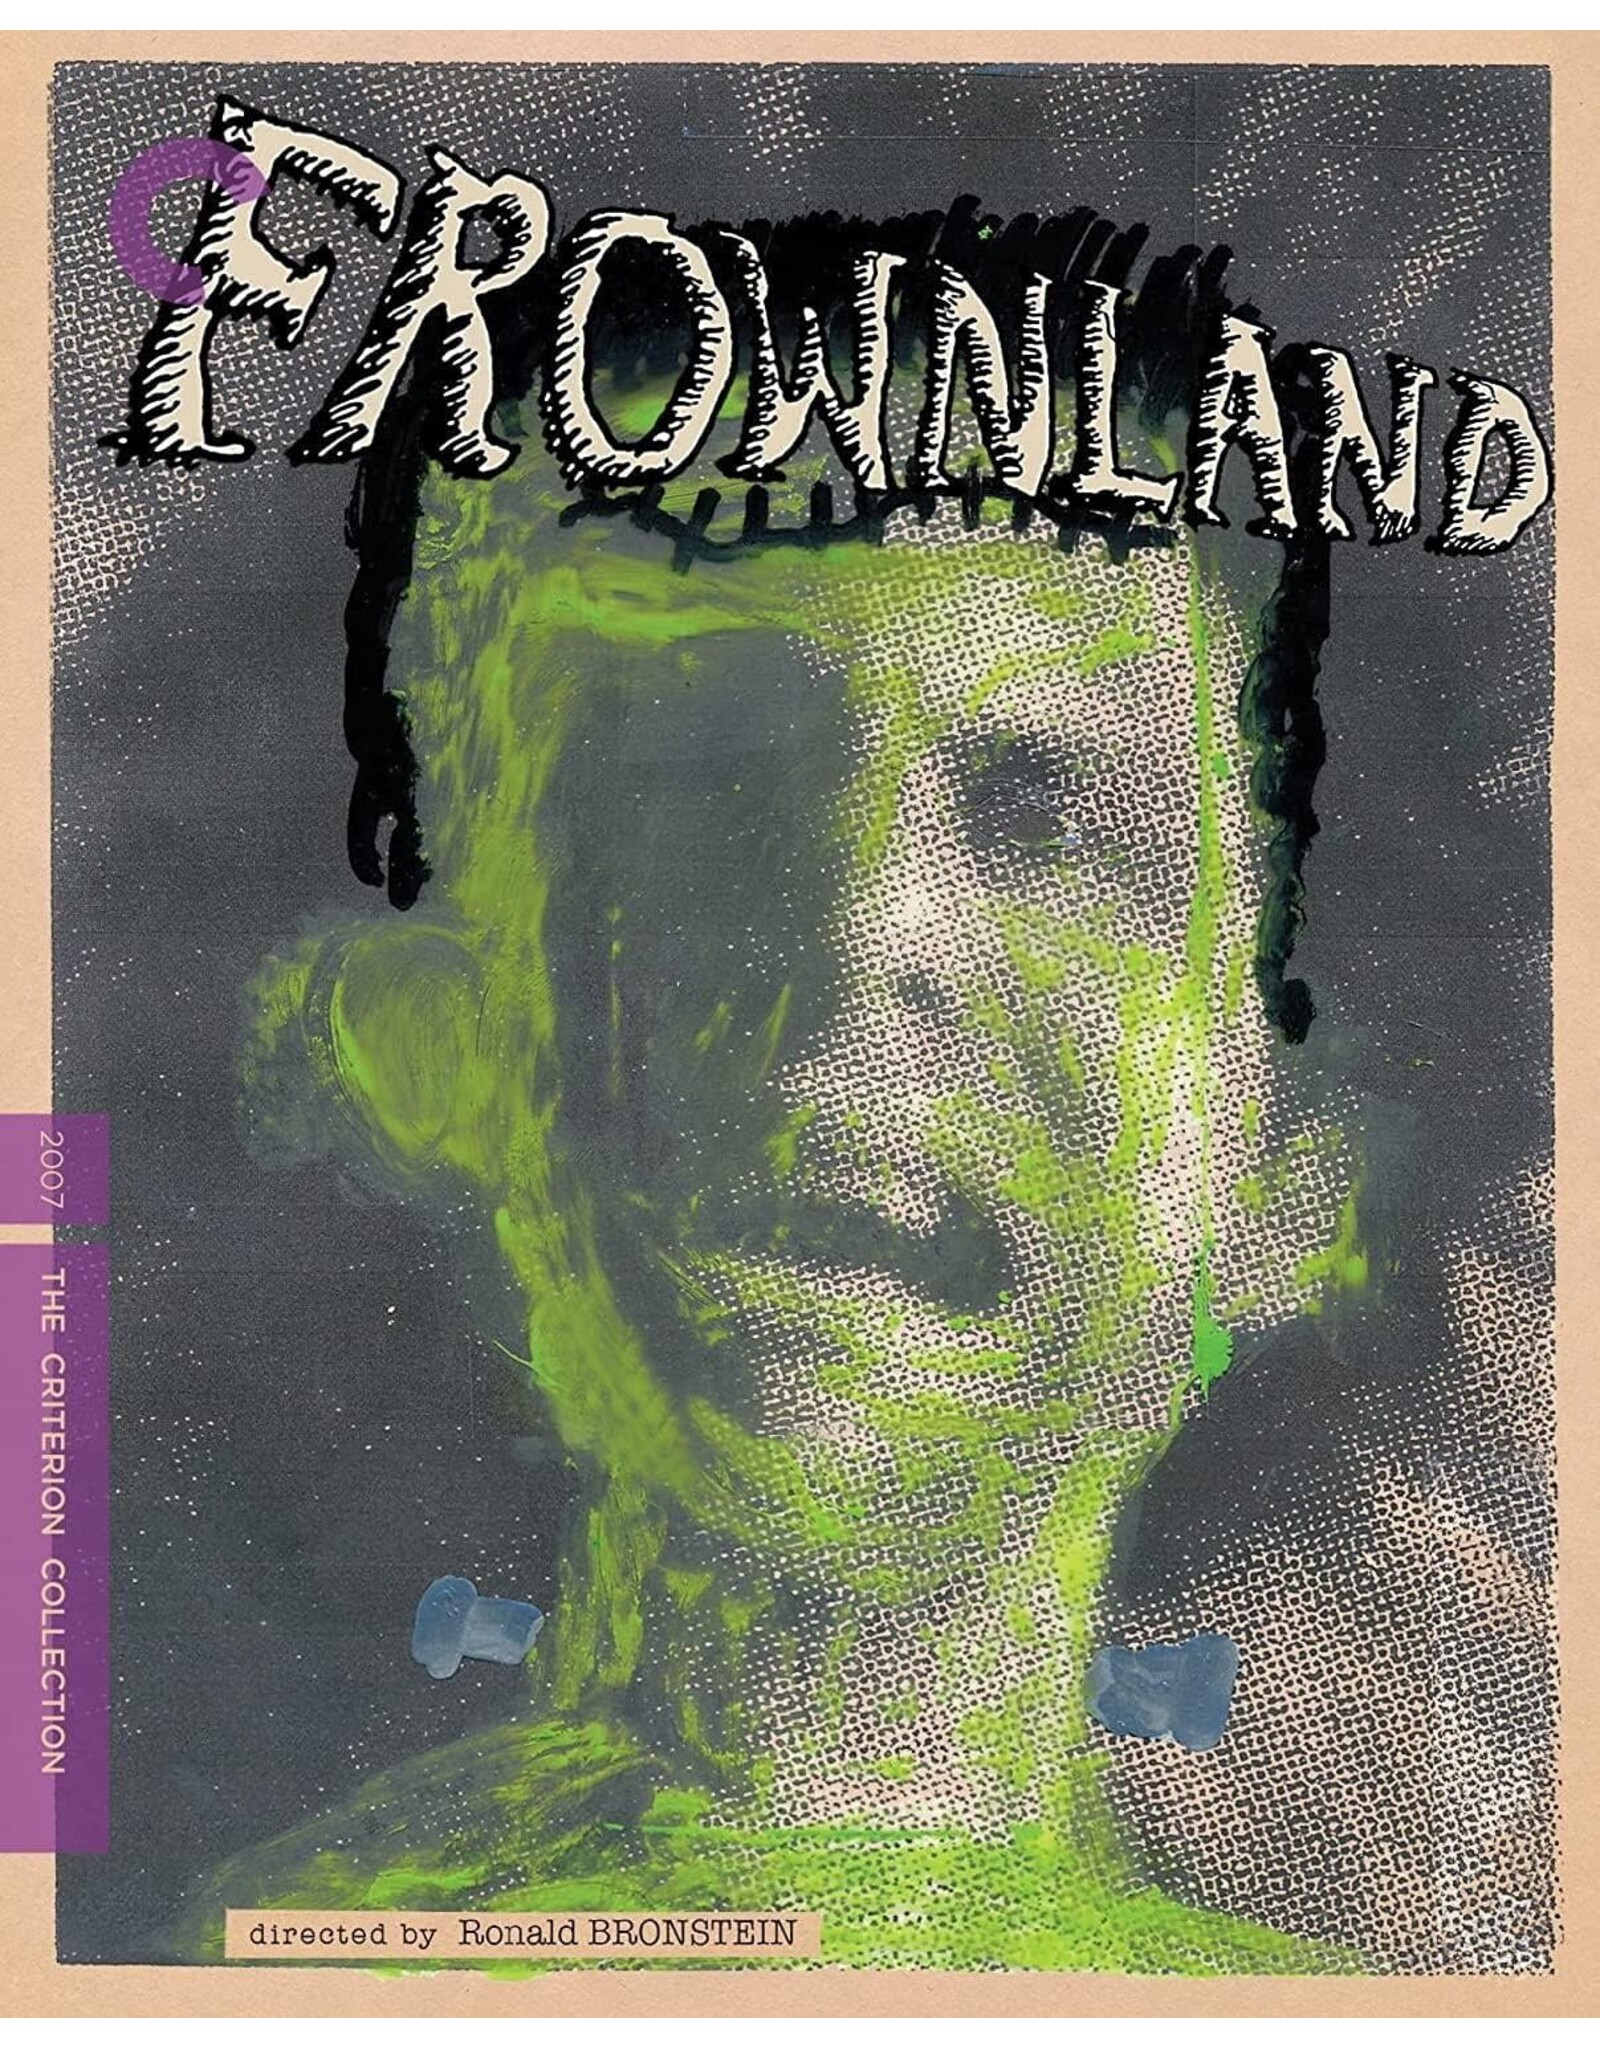 Criterion Collection Frownland - Criterion Collection (Used)